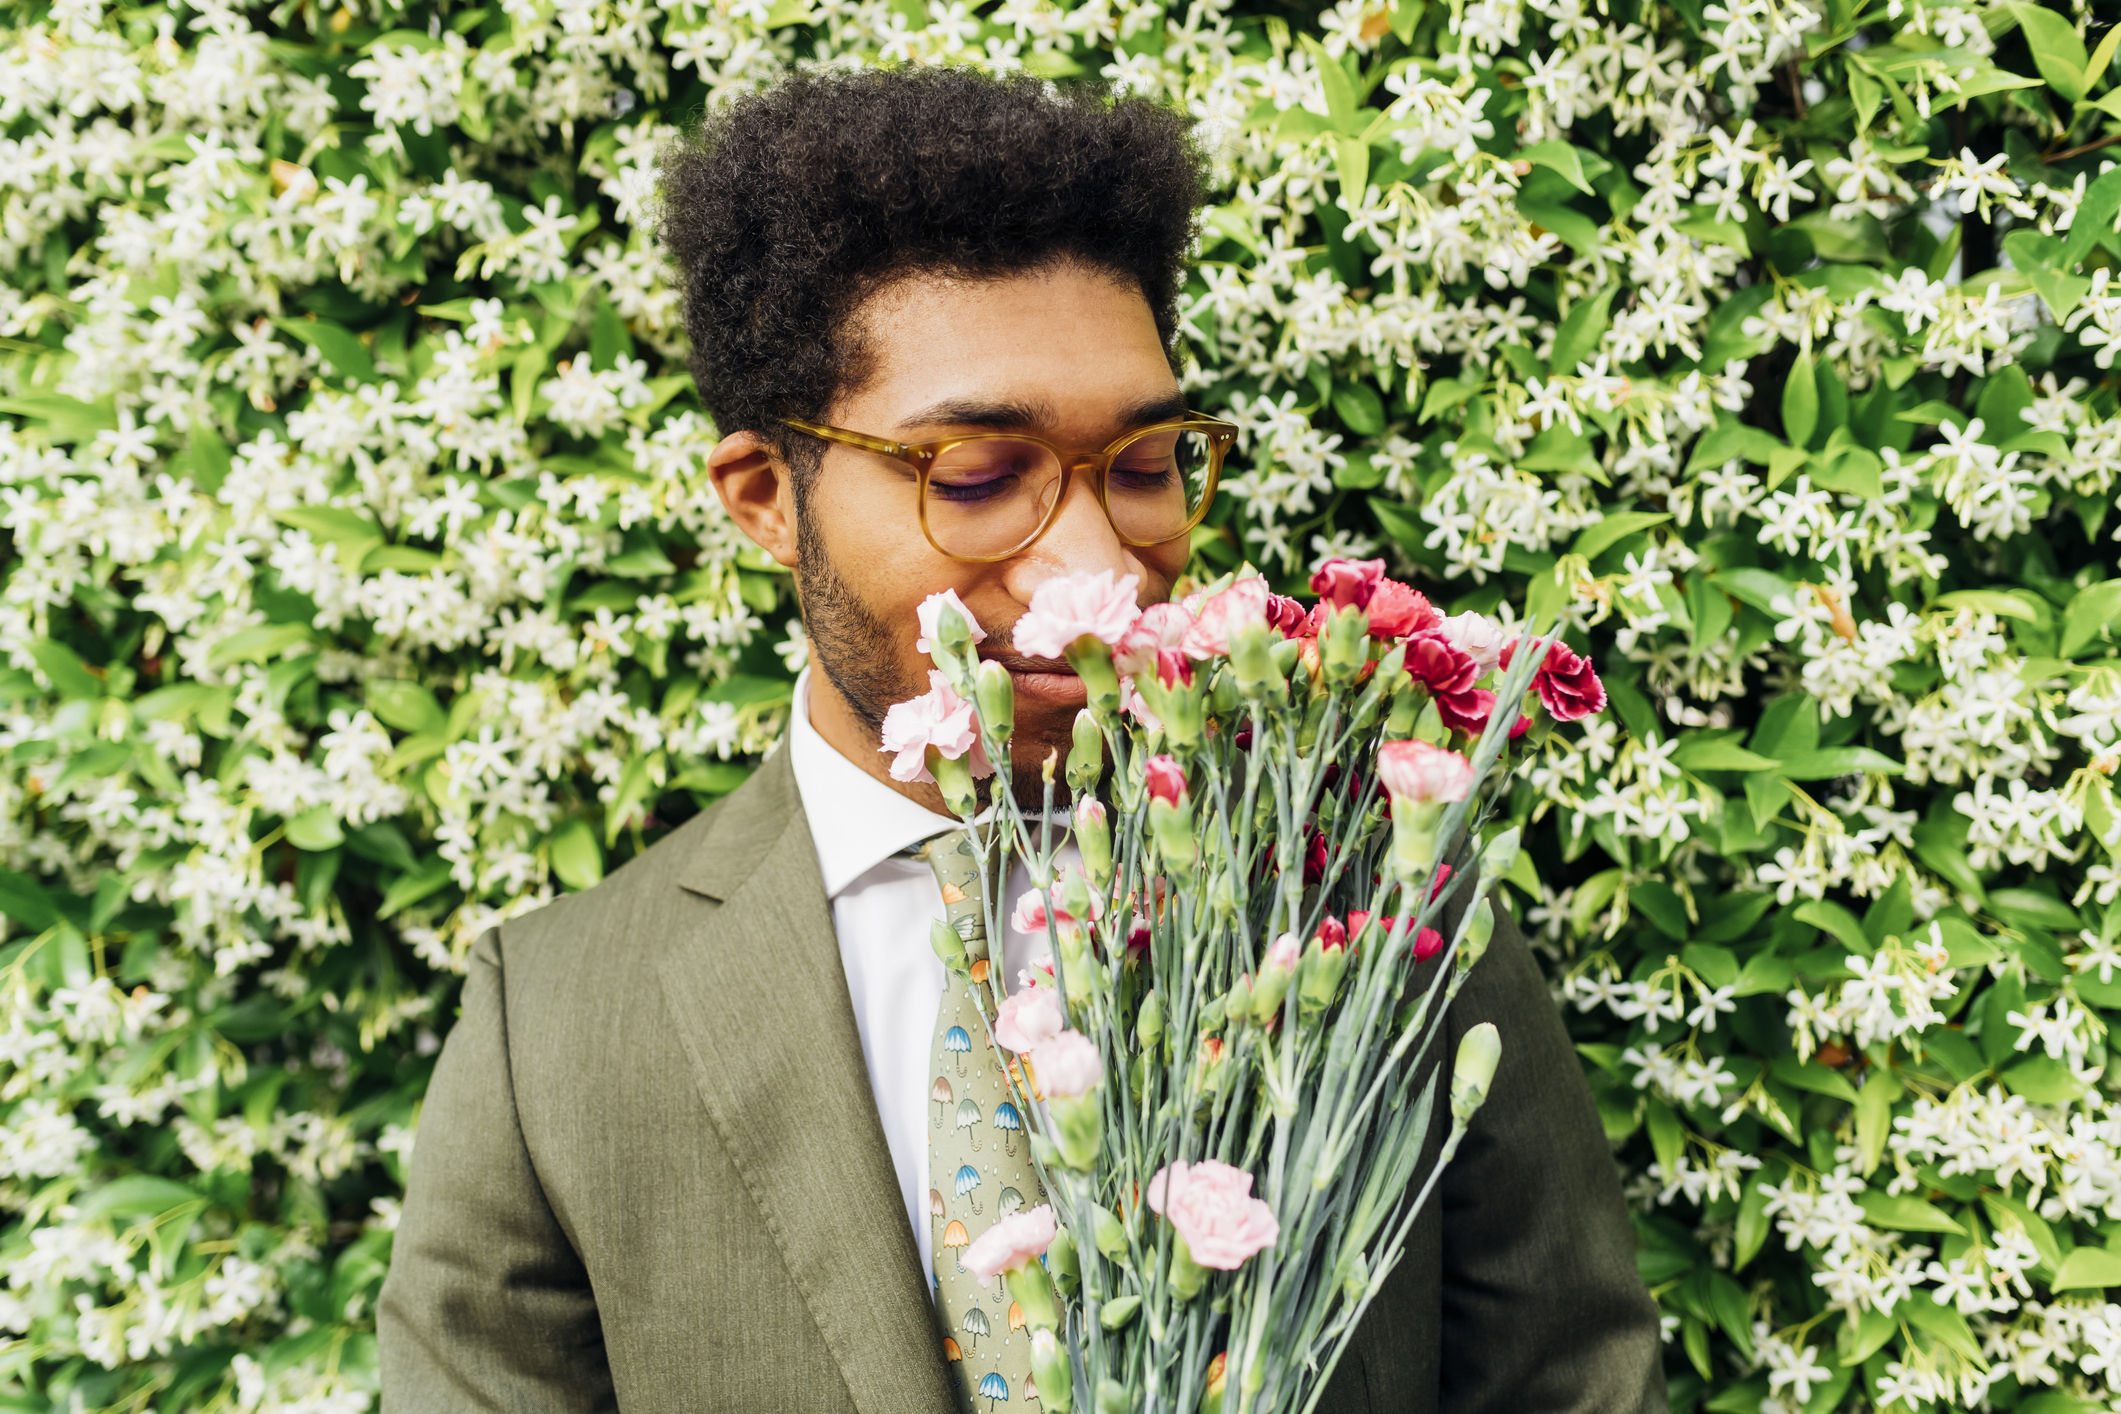 Person holding a bouquet in front of their face against a floral backdrop